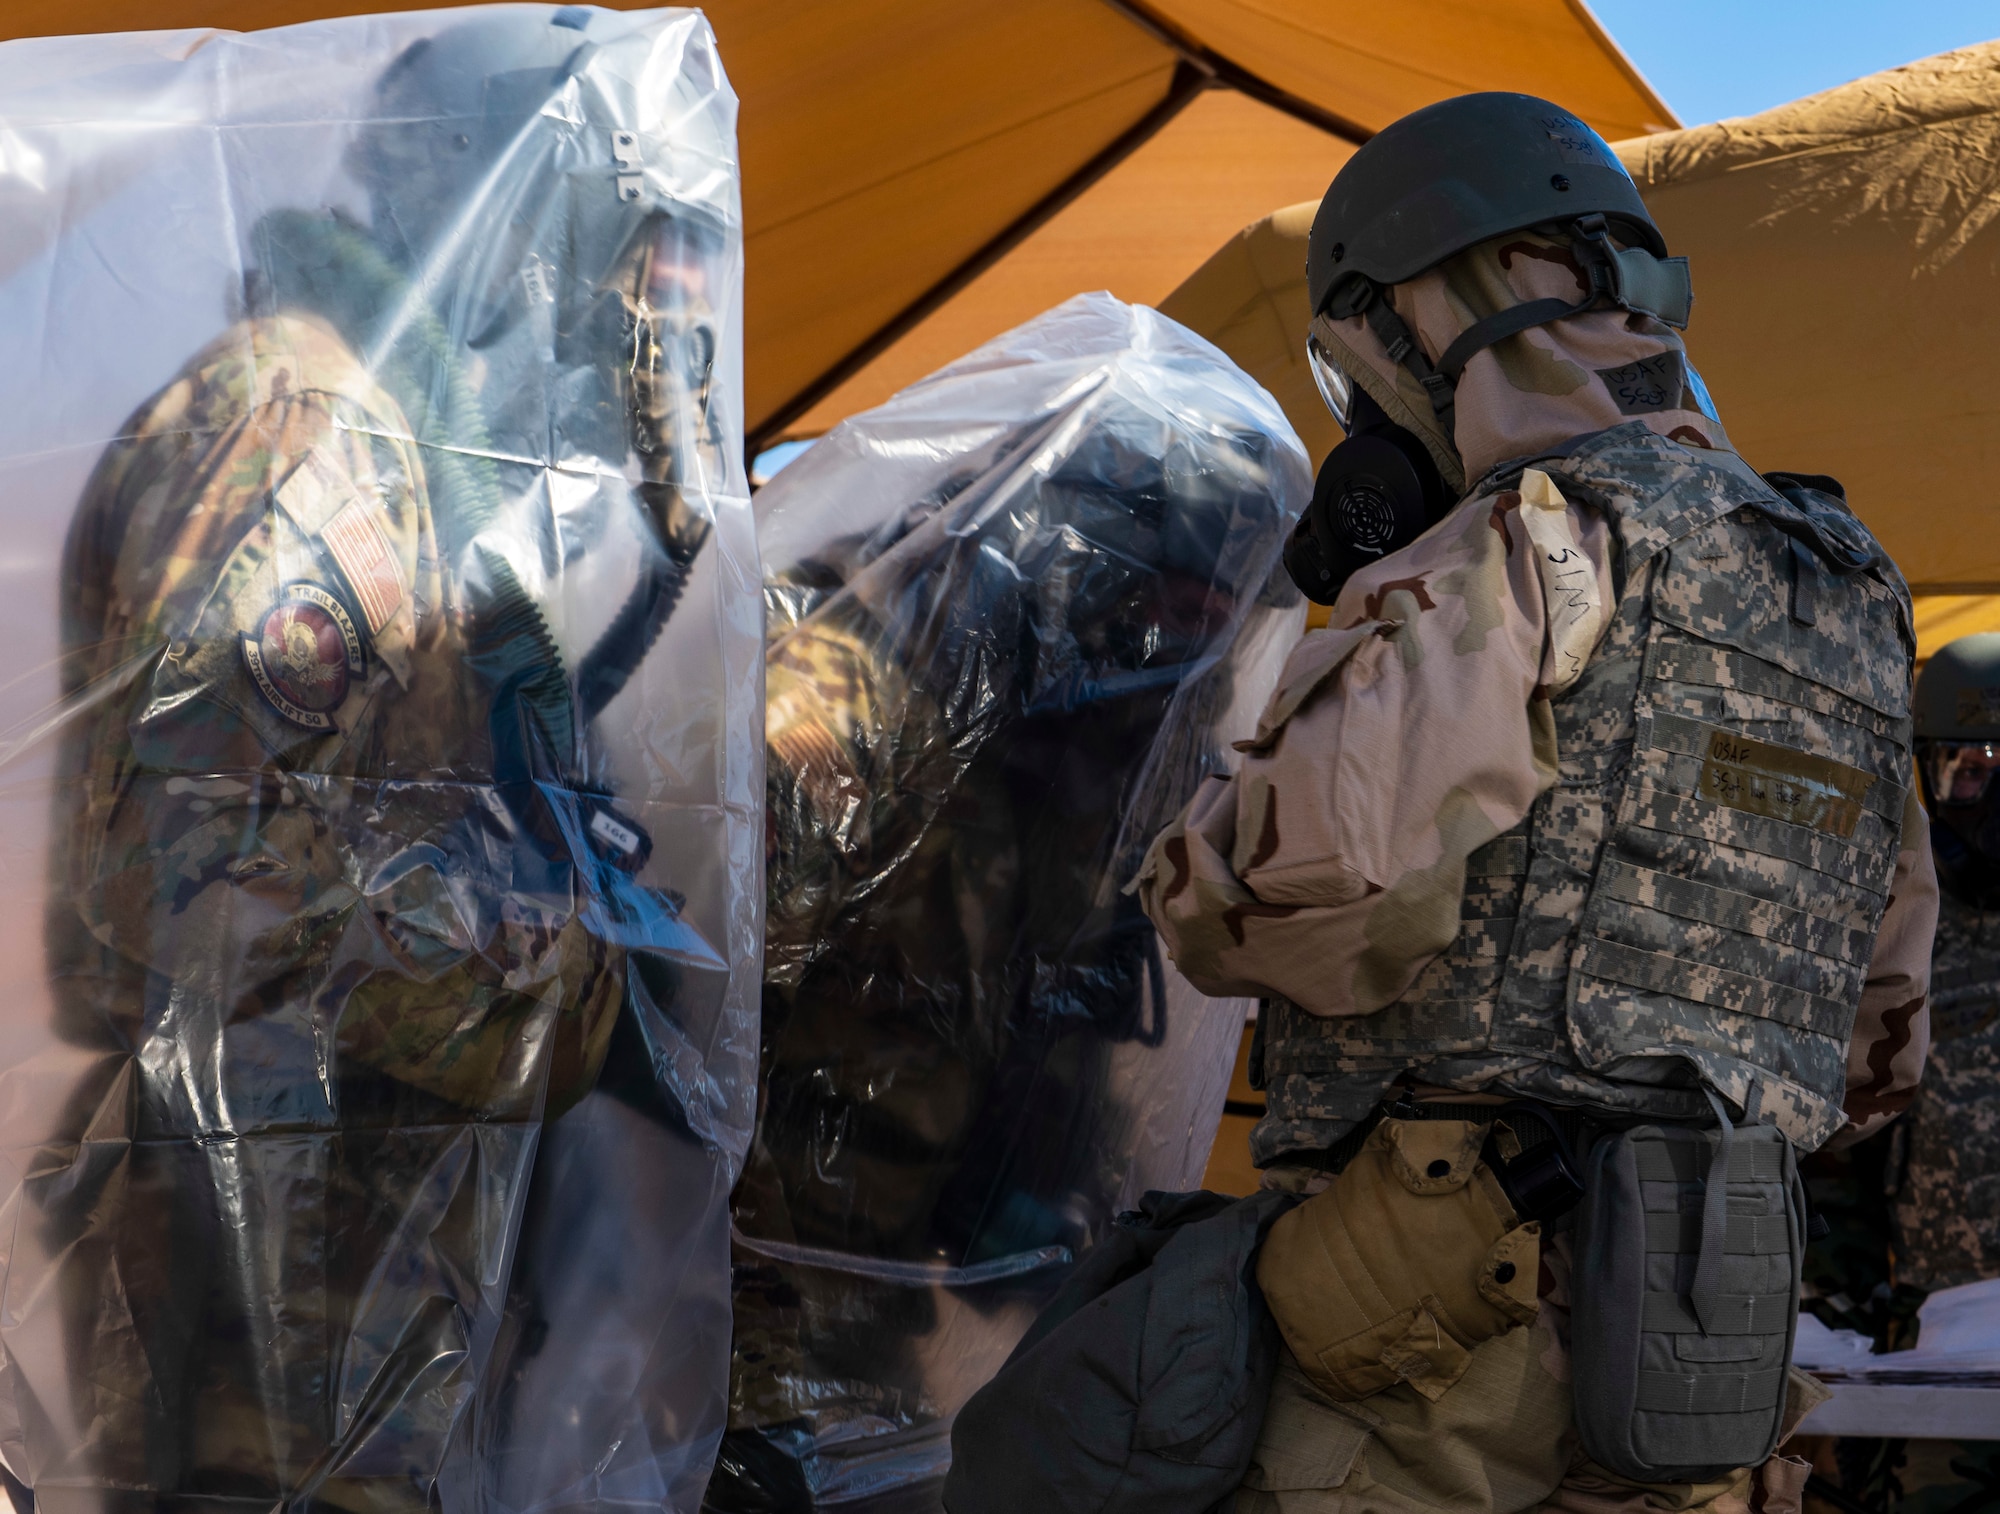 Pilots from the 317th Airlift Wing are inspected before going through a decontamination line at Dyess Air Force Base, Texas, Nov. 17, 2020.